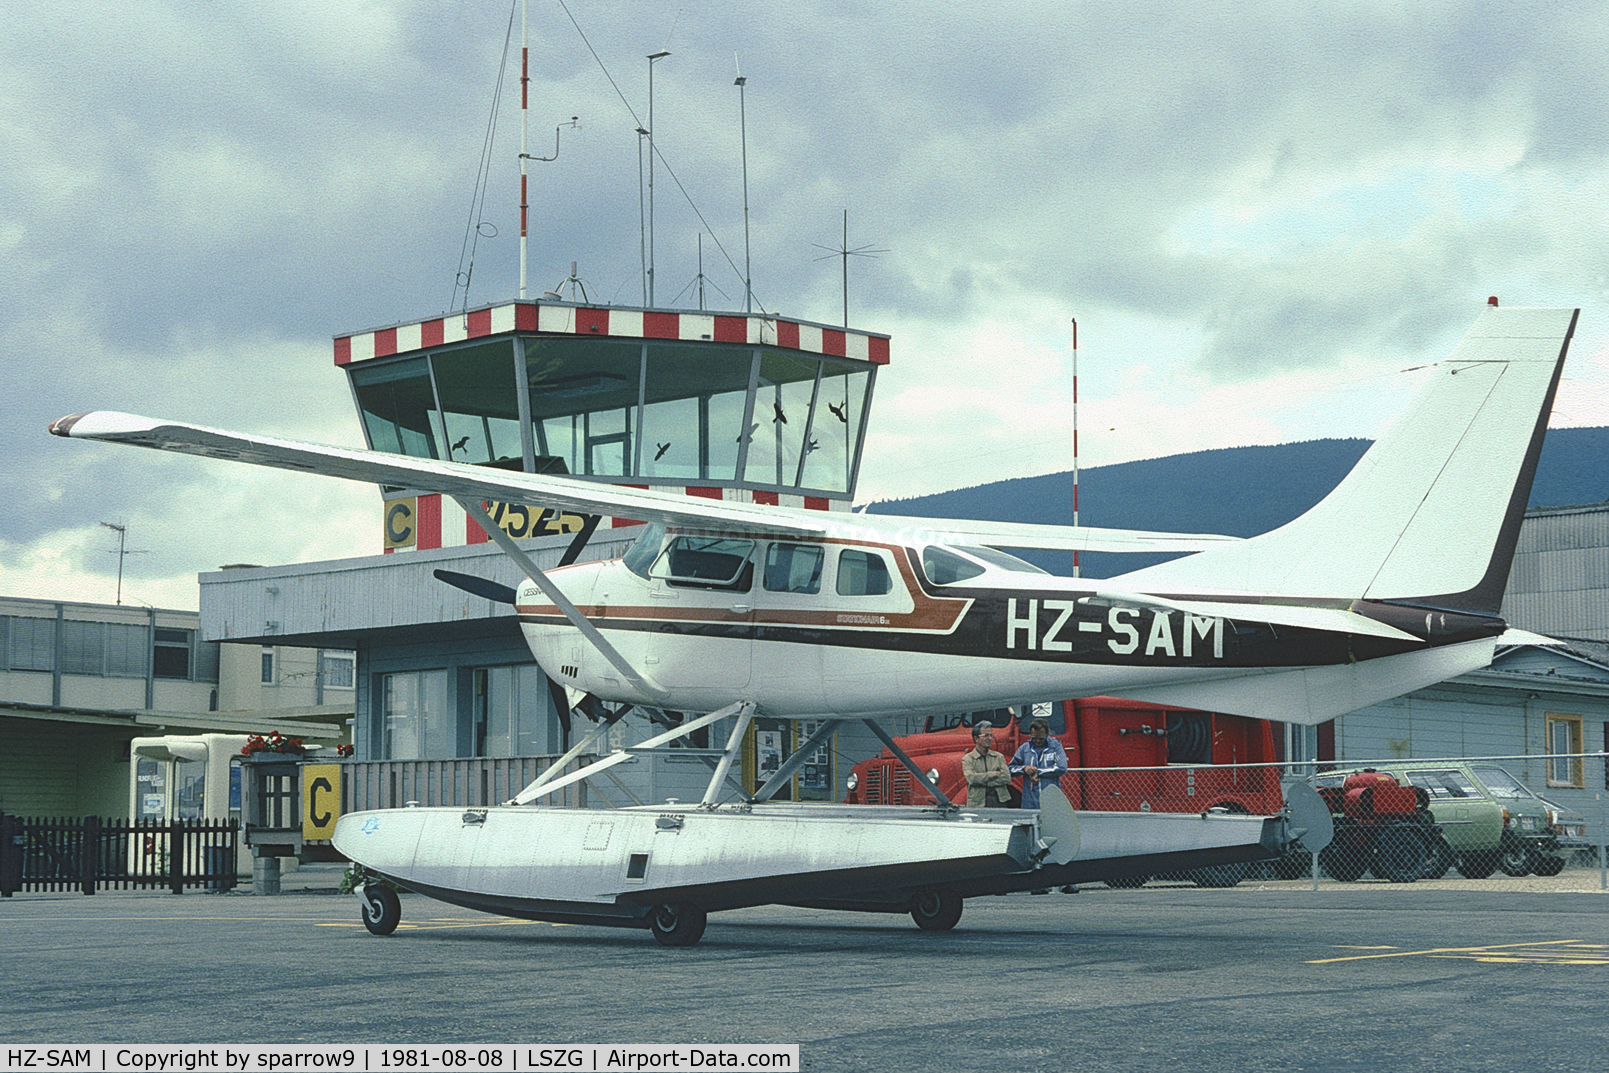 HZ-SAM, 1977 Cessna U206G Stationair C/N U20604128, At Grenchen in old paint-scheme. The old airport-building behind.